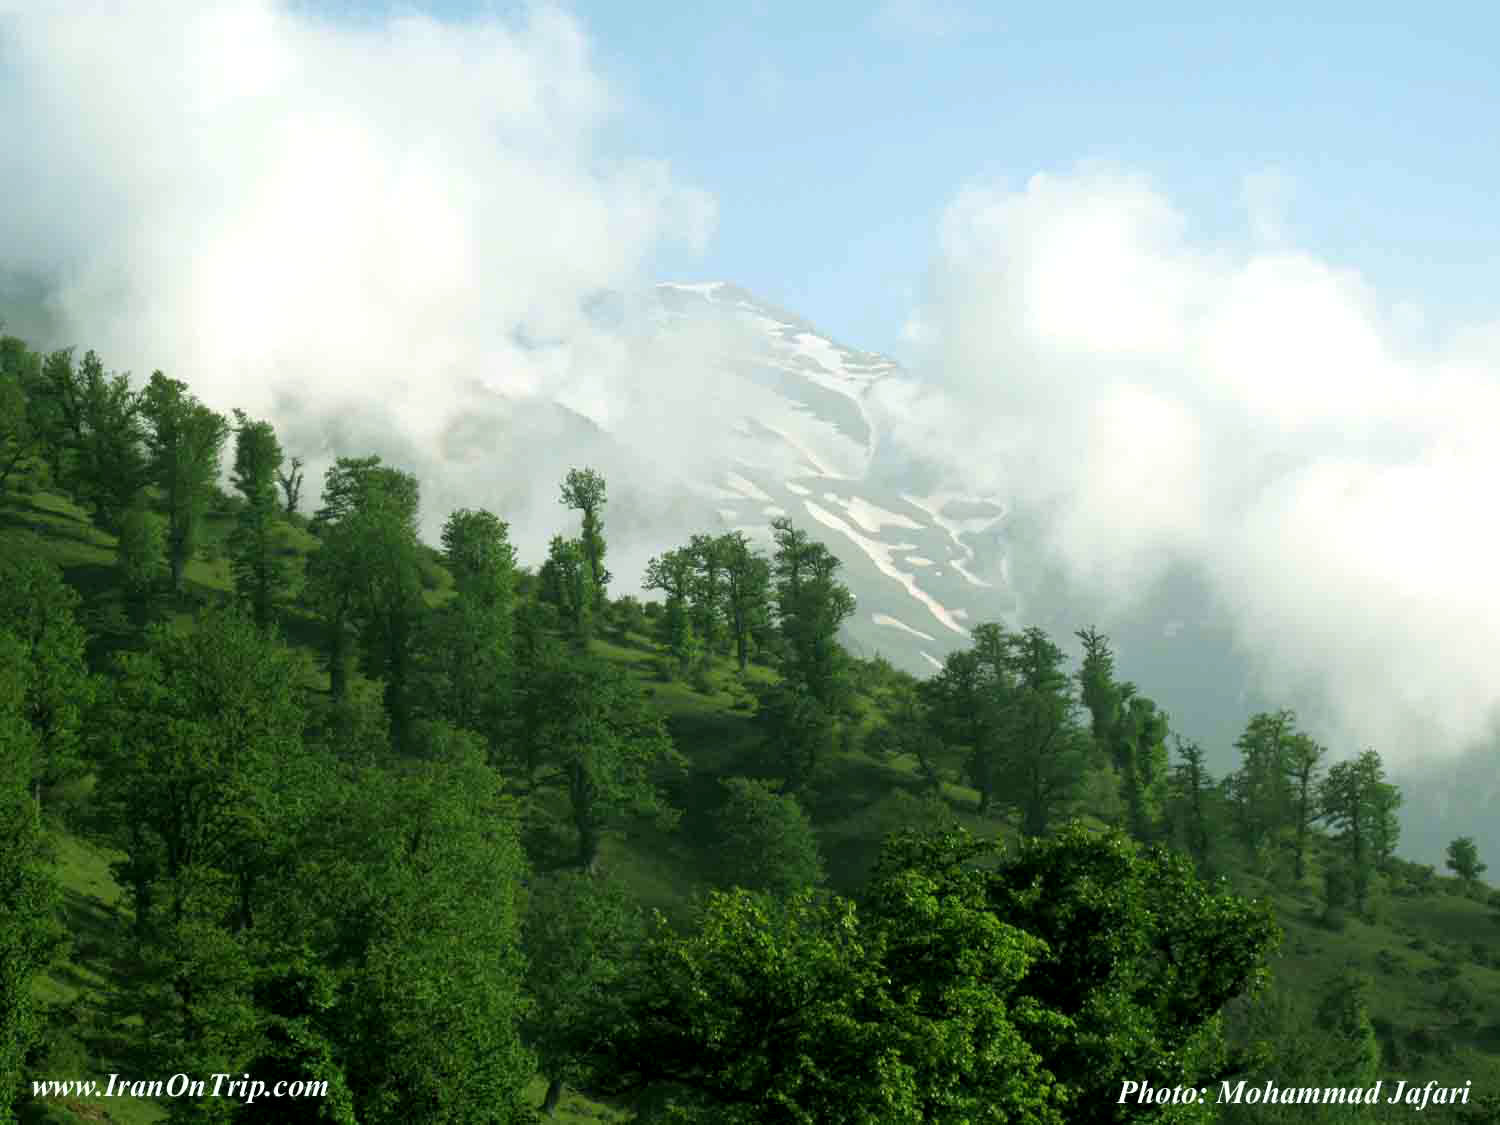 Mazichal Forests - Forests of Iran